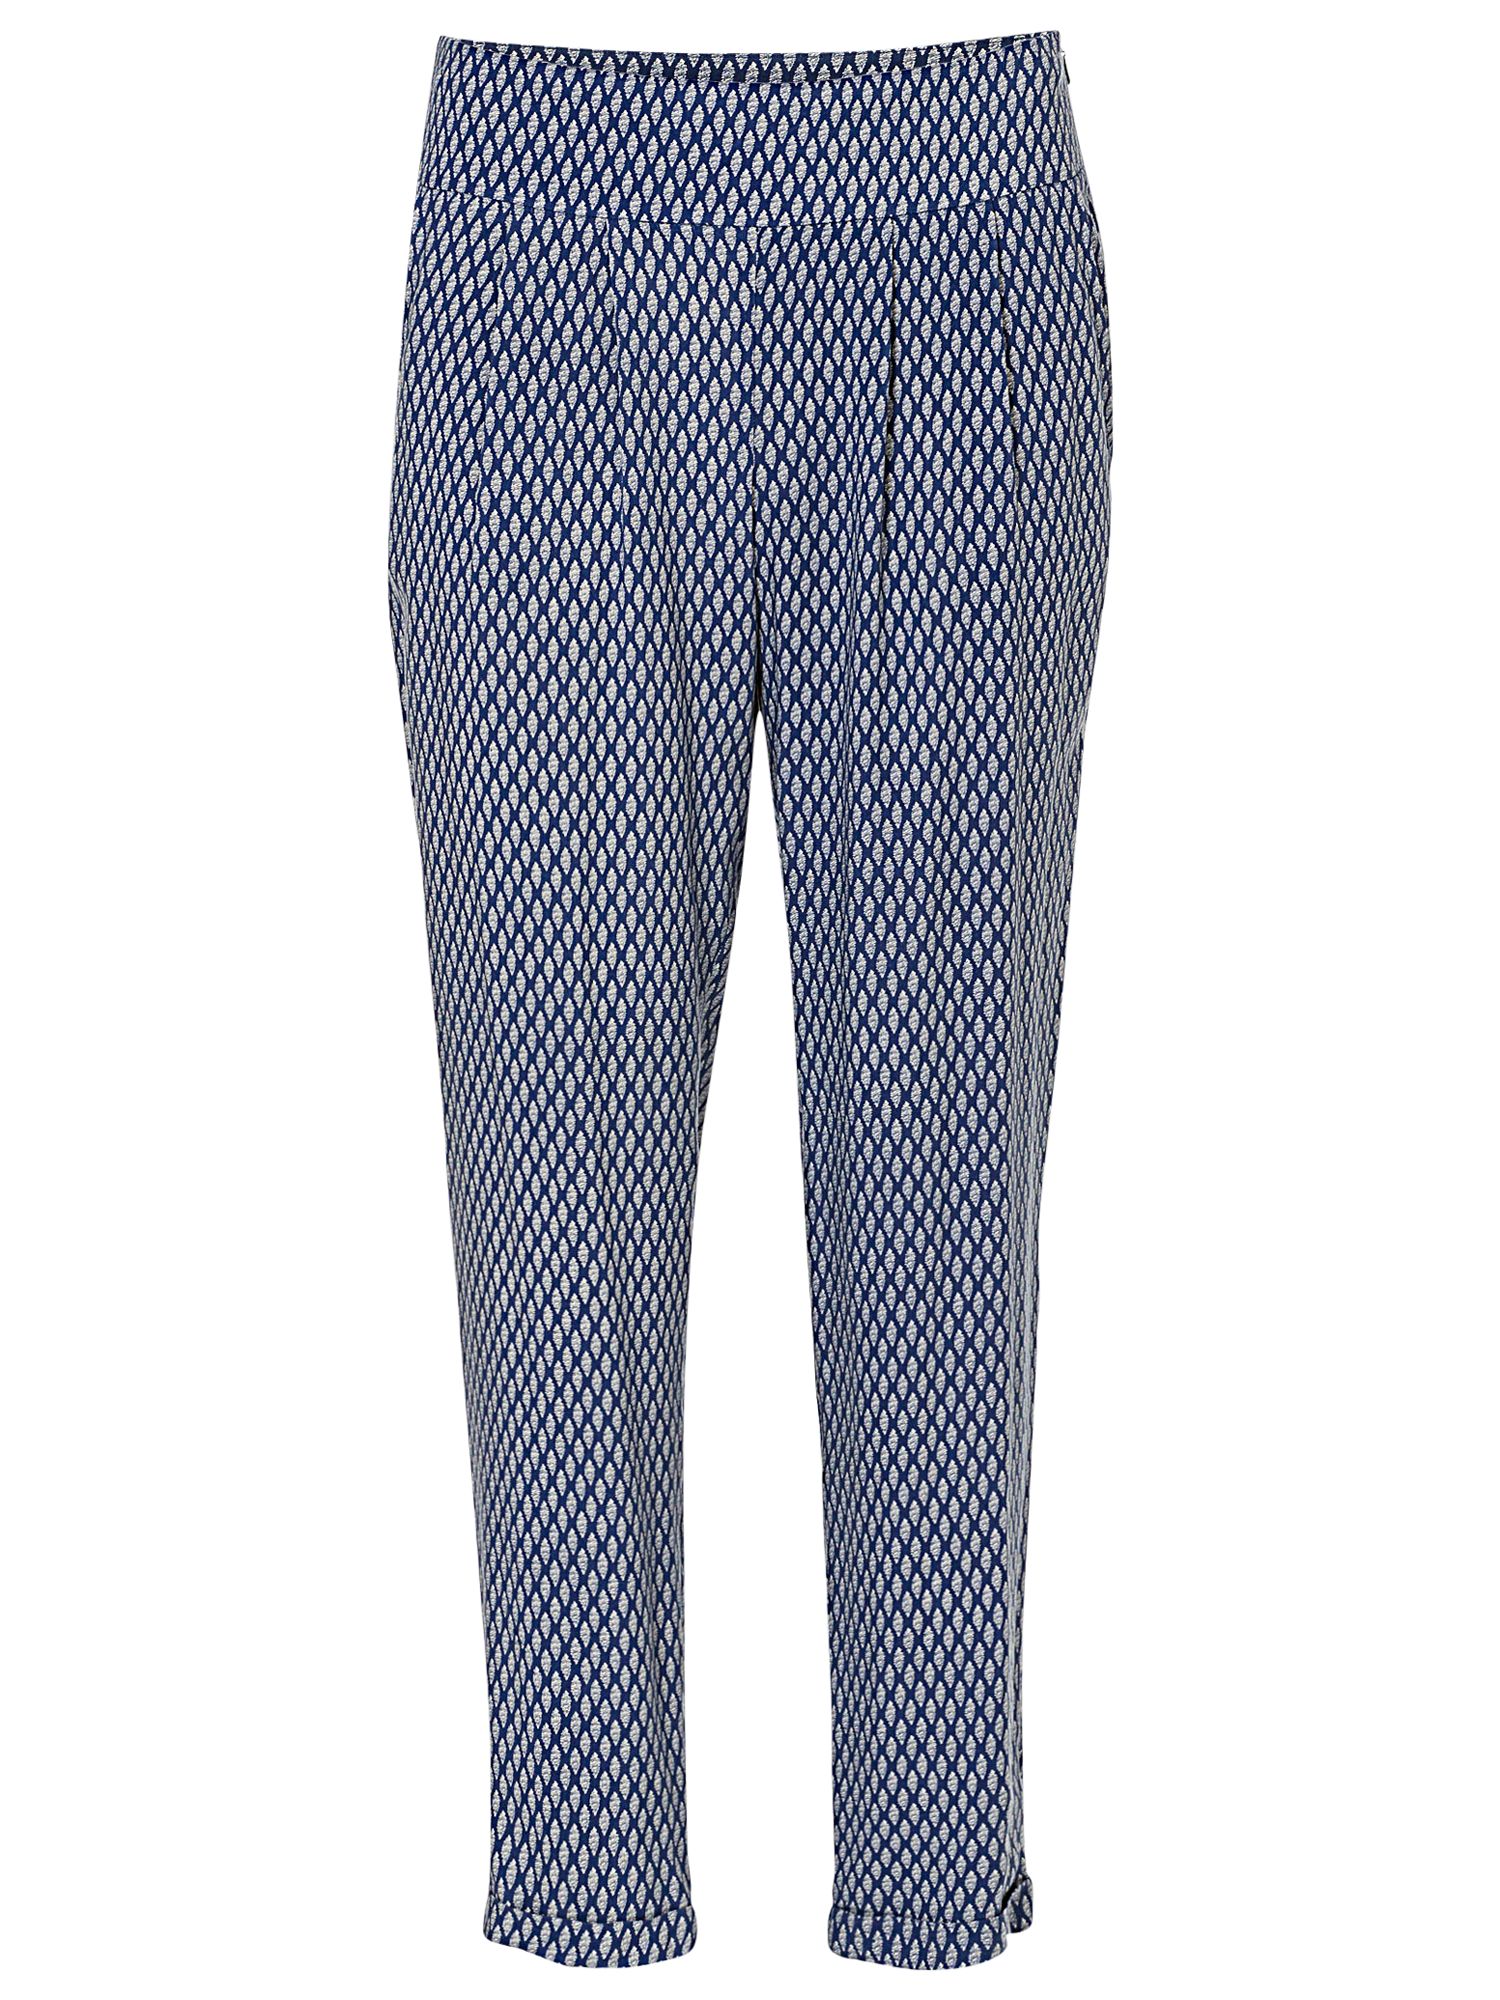 Betty & Co. Graphic Print Trousers, Dark Blue